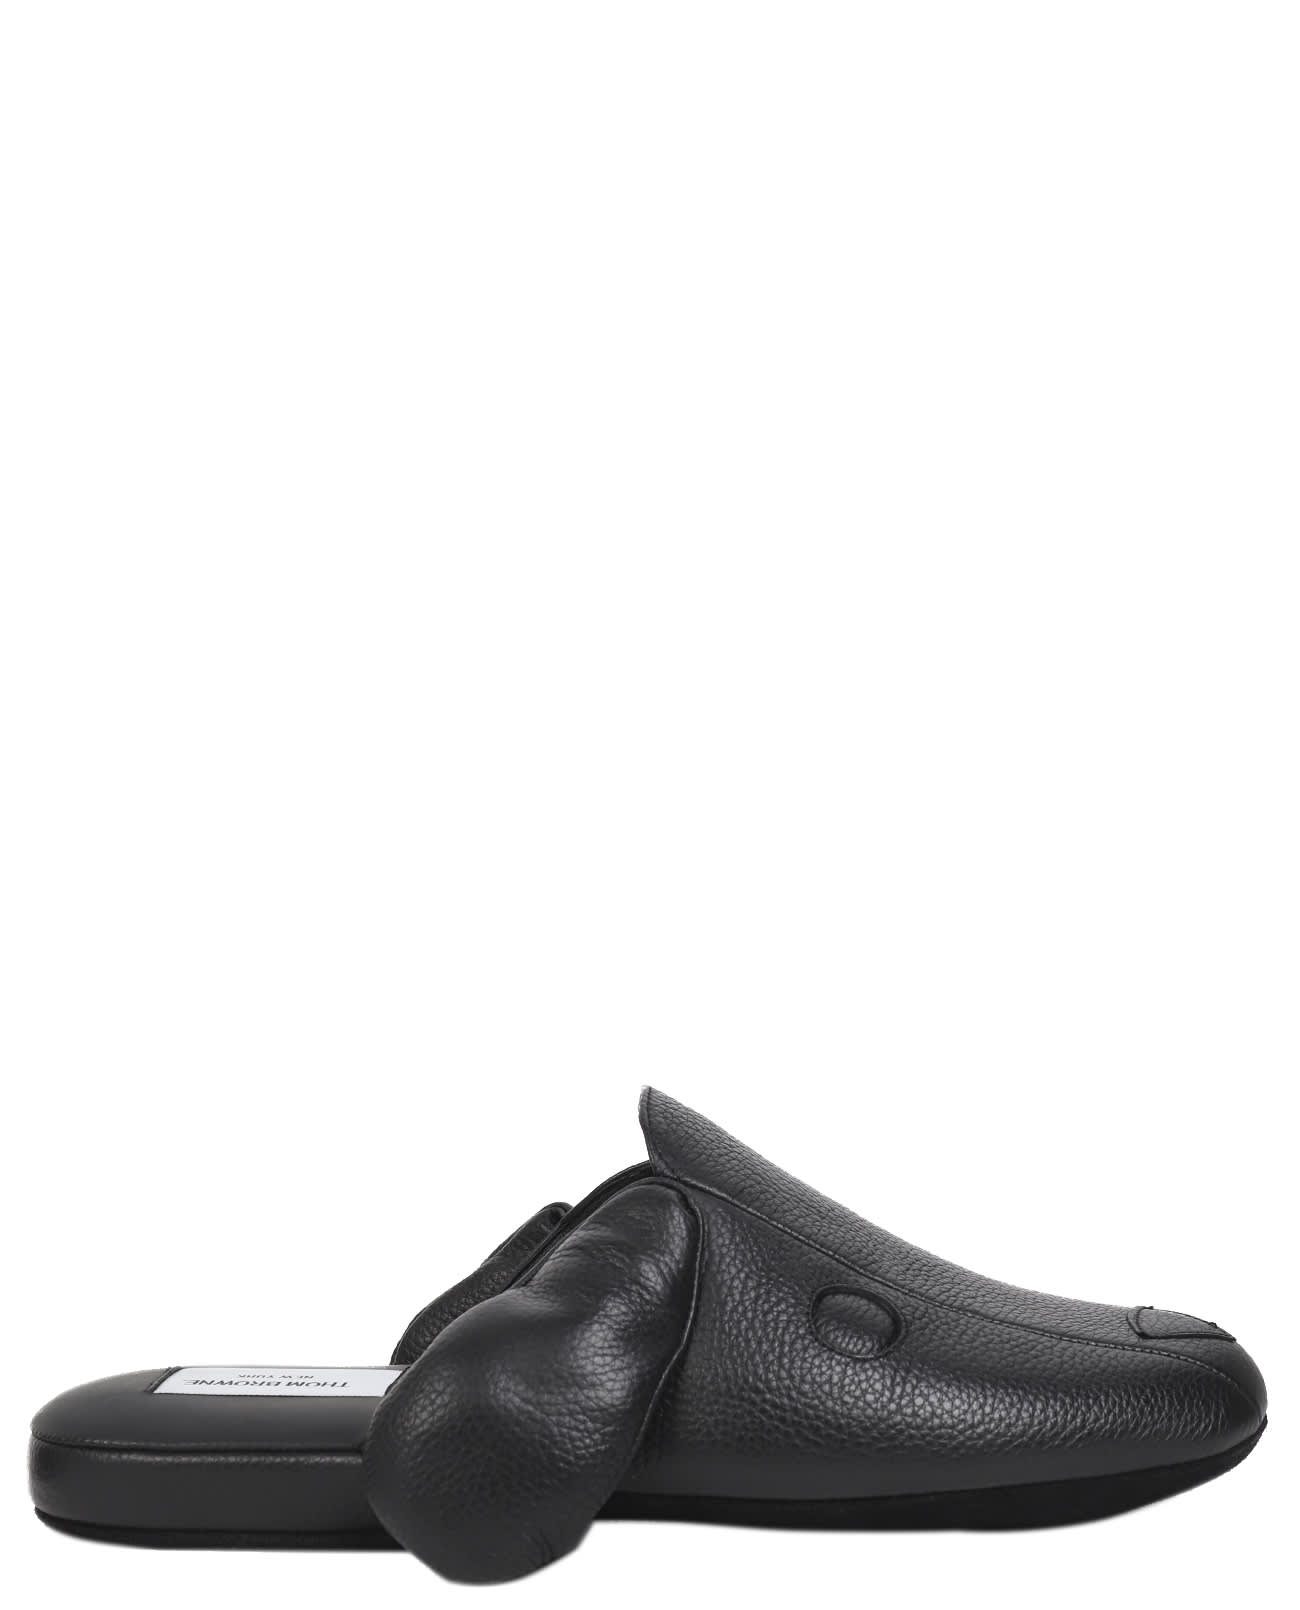 Thom Browne Hector House Slippers In Black